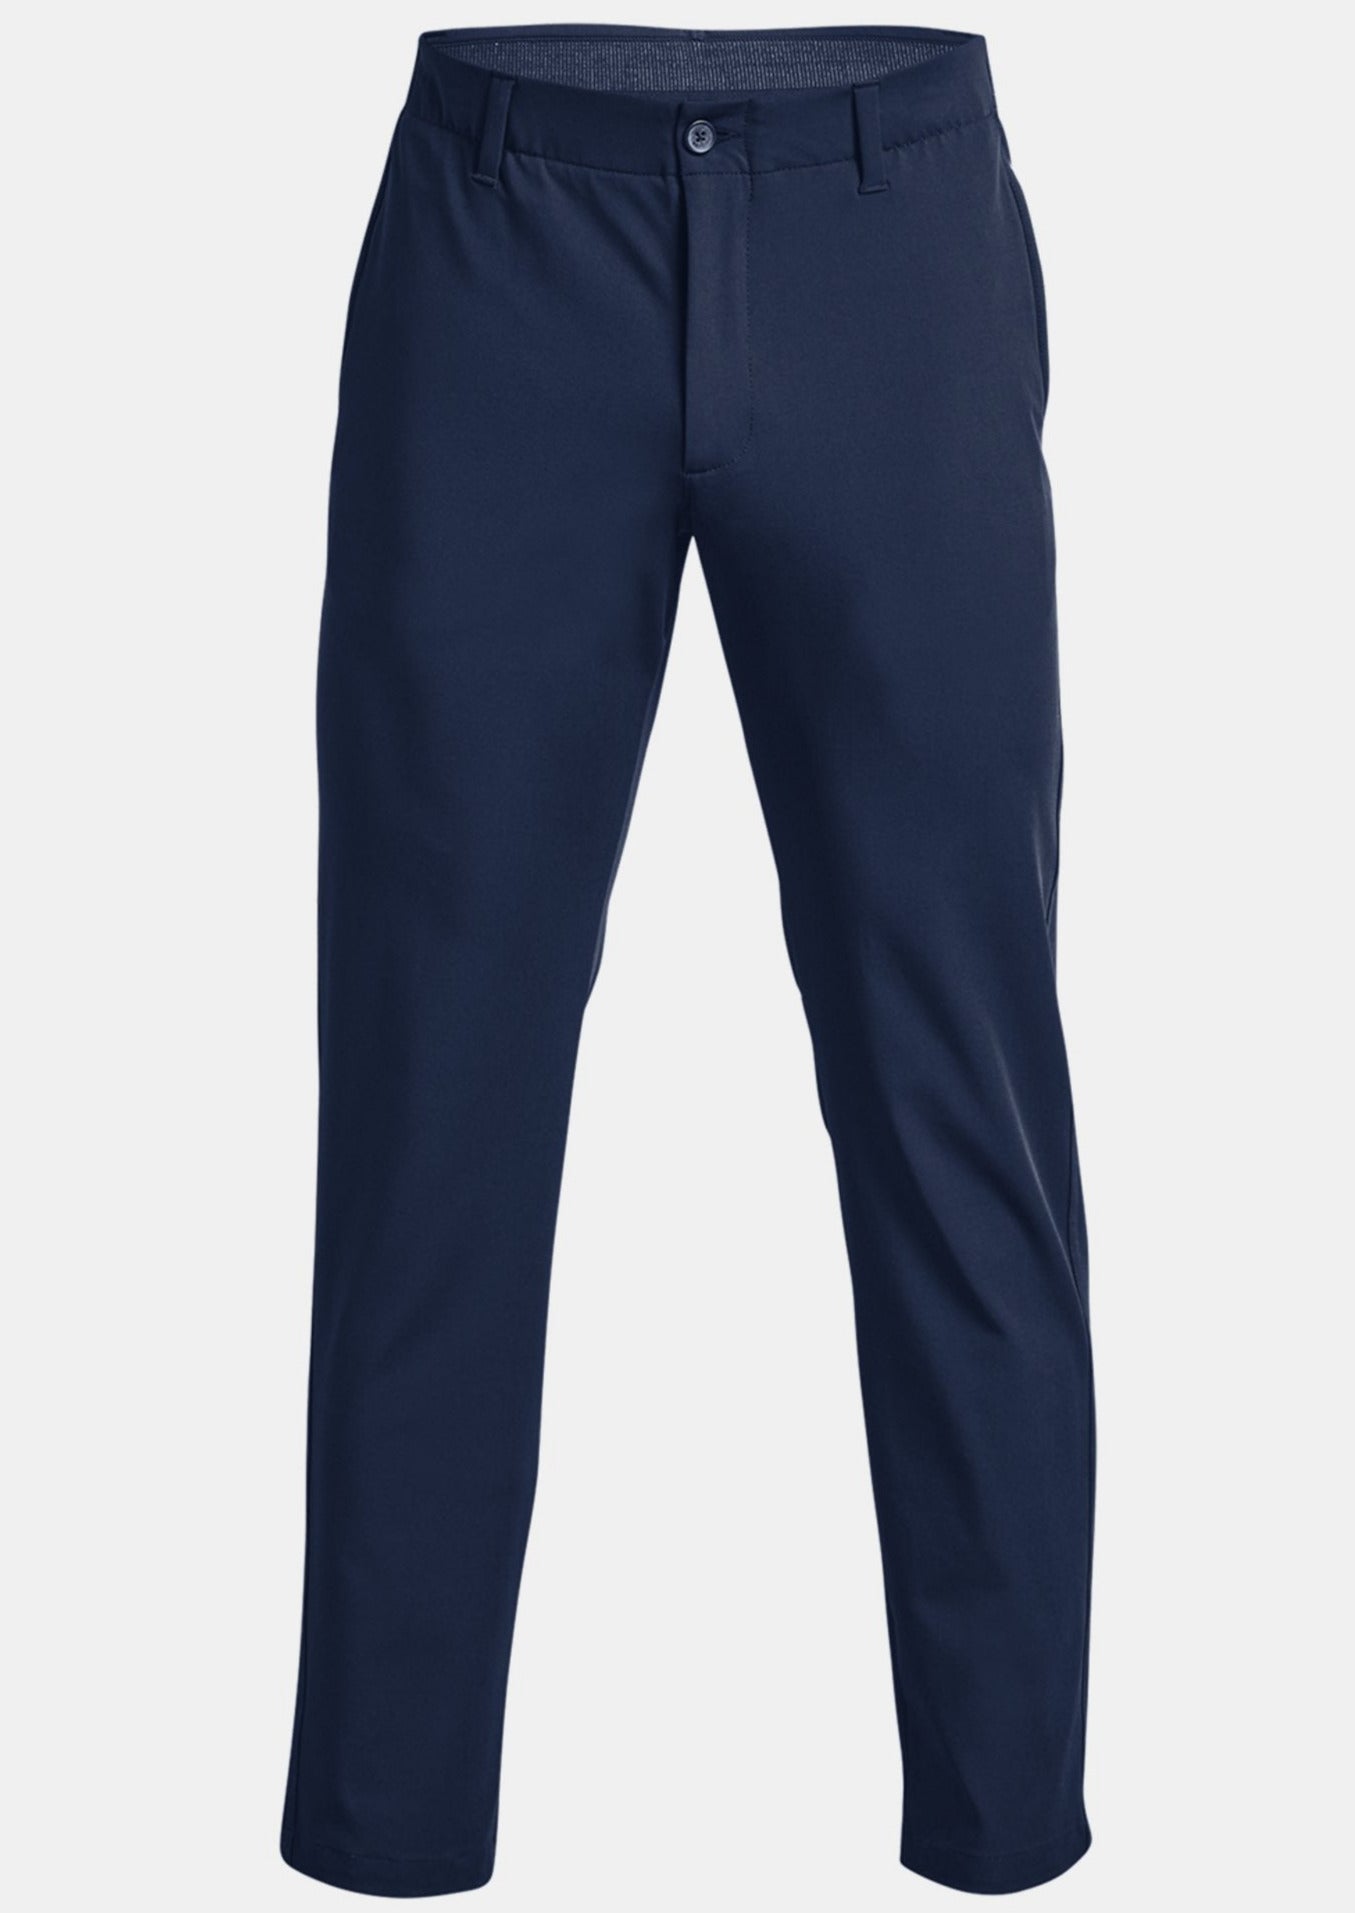 Ping Golf Trousers  Mens Ping Trousers Sale UK